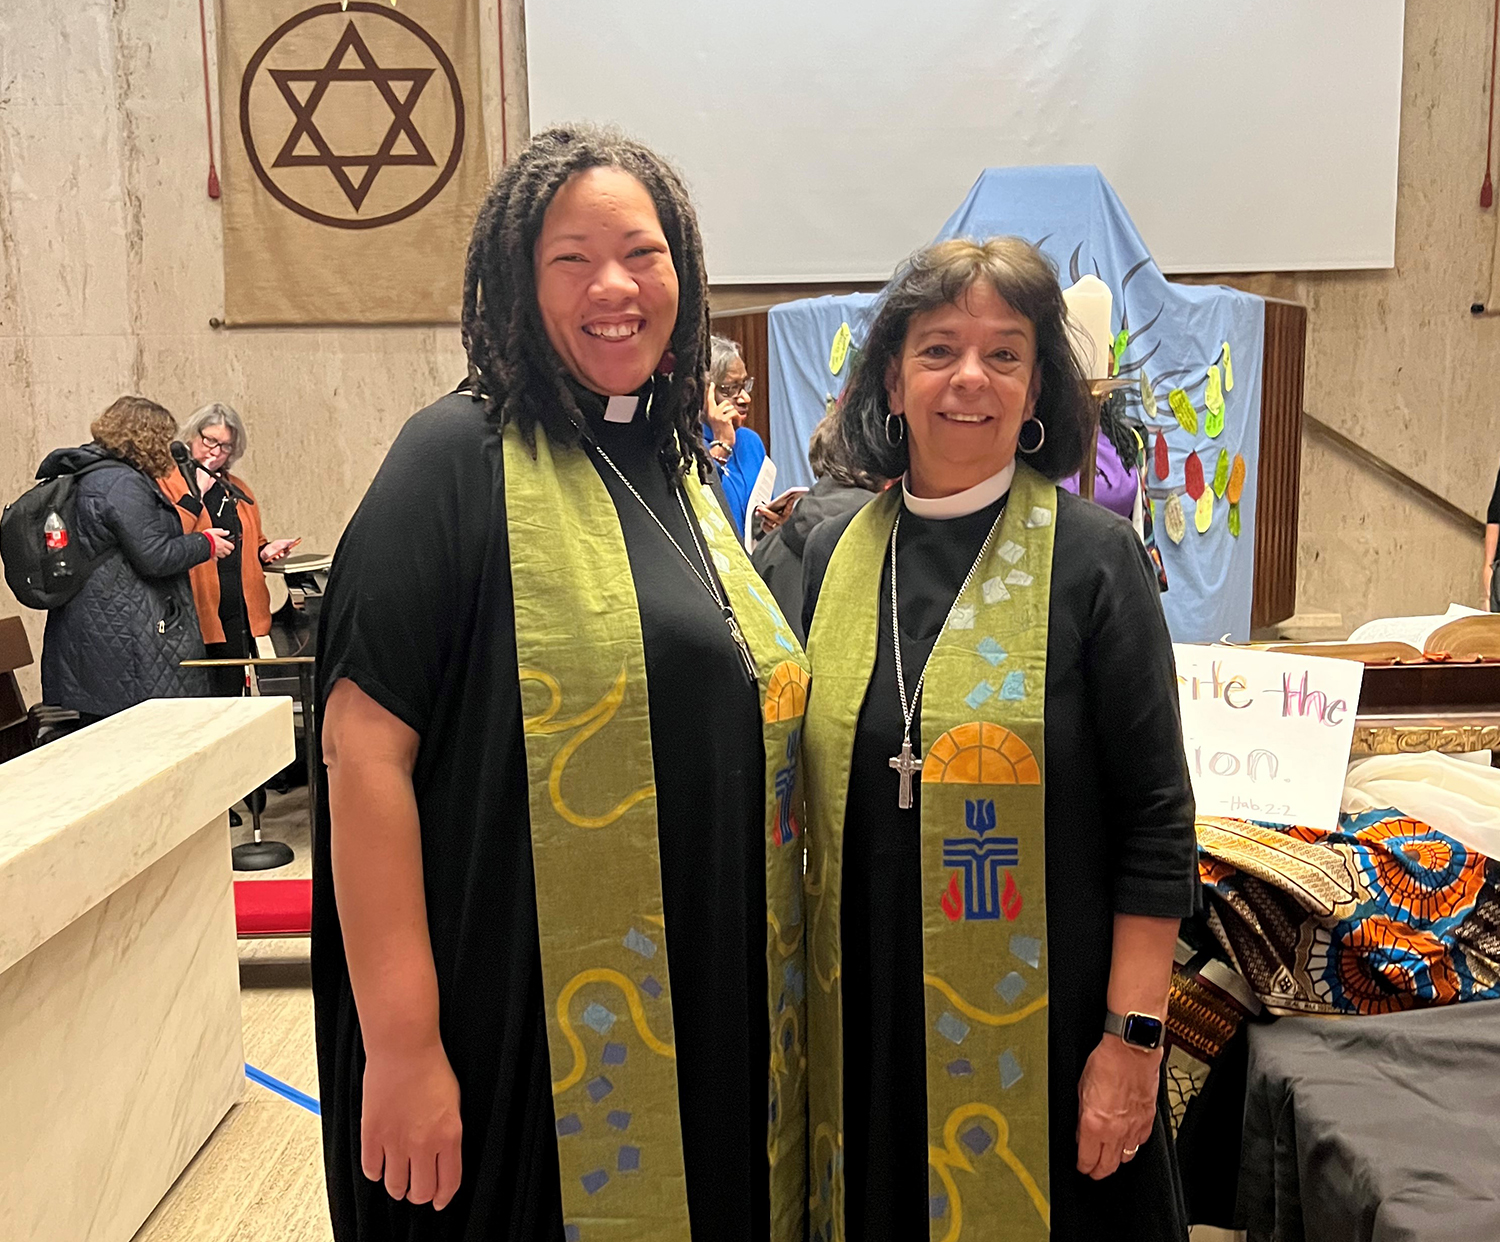 Shavon Starling-Louis (left) and Ruth Santana-Grace (right) during ecumenical worship at the 67th session of the Commission on the Status of Women at the United Nations, March 6, 2023. Photo courtesy of Ruth Santana-Grace.